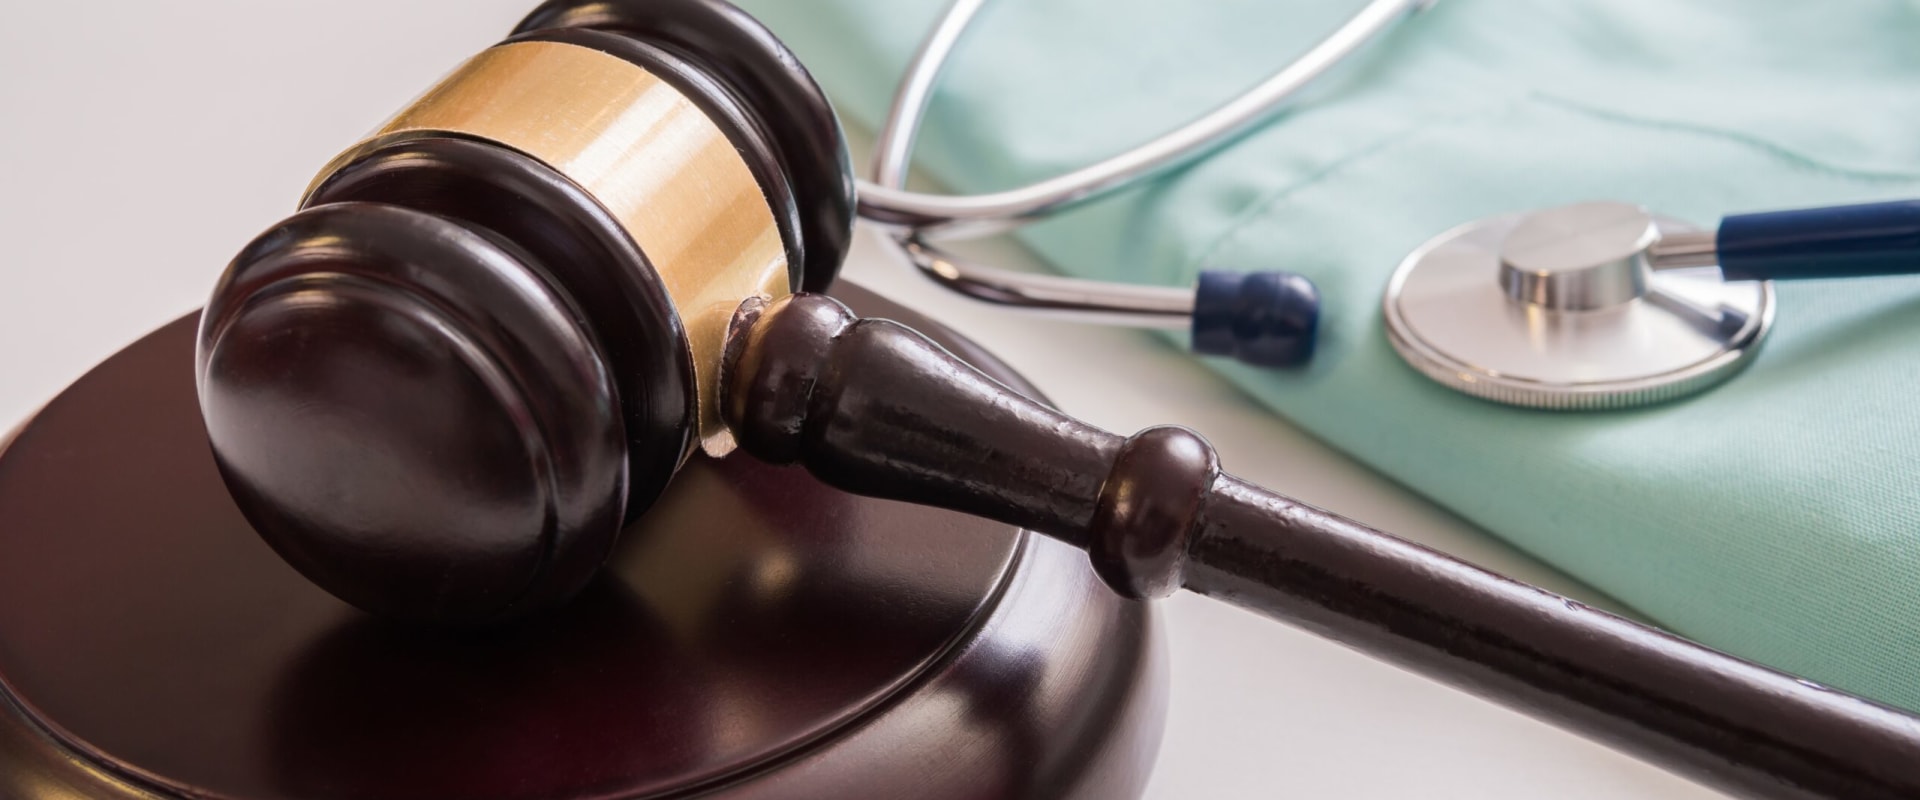 The Most Common Cause of Medical Malpractice Claims